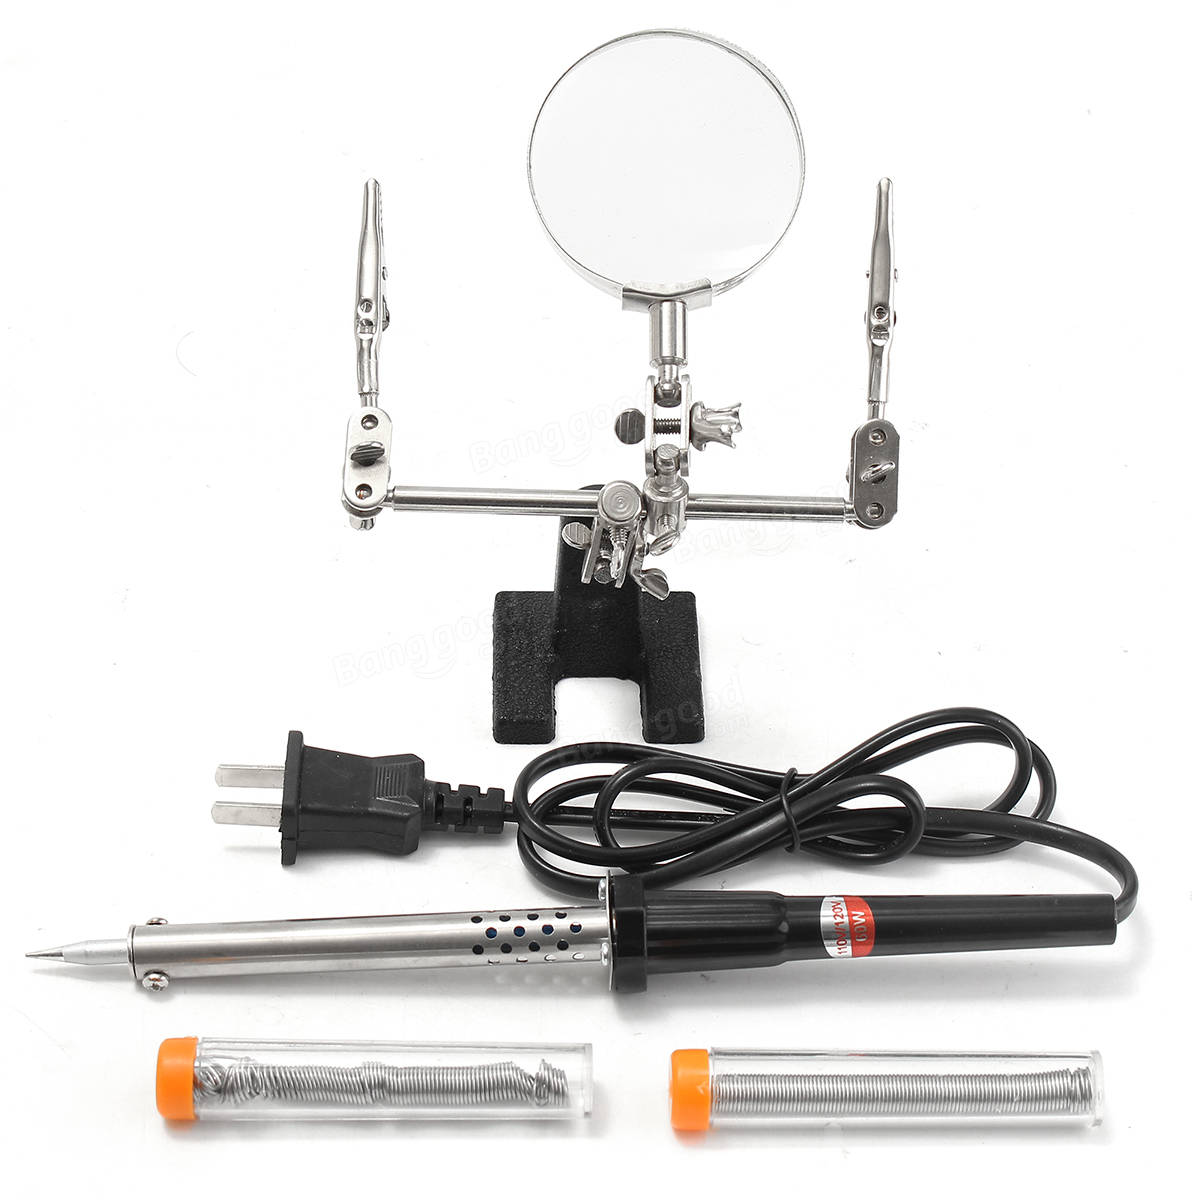 110V 60W Soldering Iron Tool Kit with Helping Hand Soldering Magnifier + 20G Soldering Wire